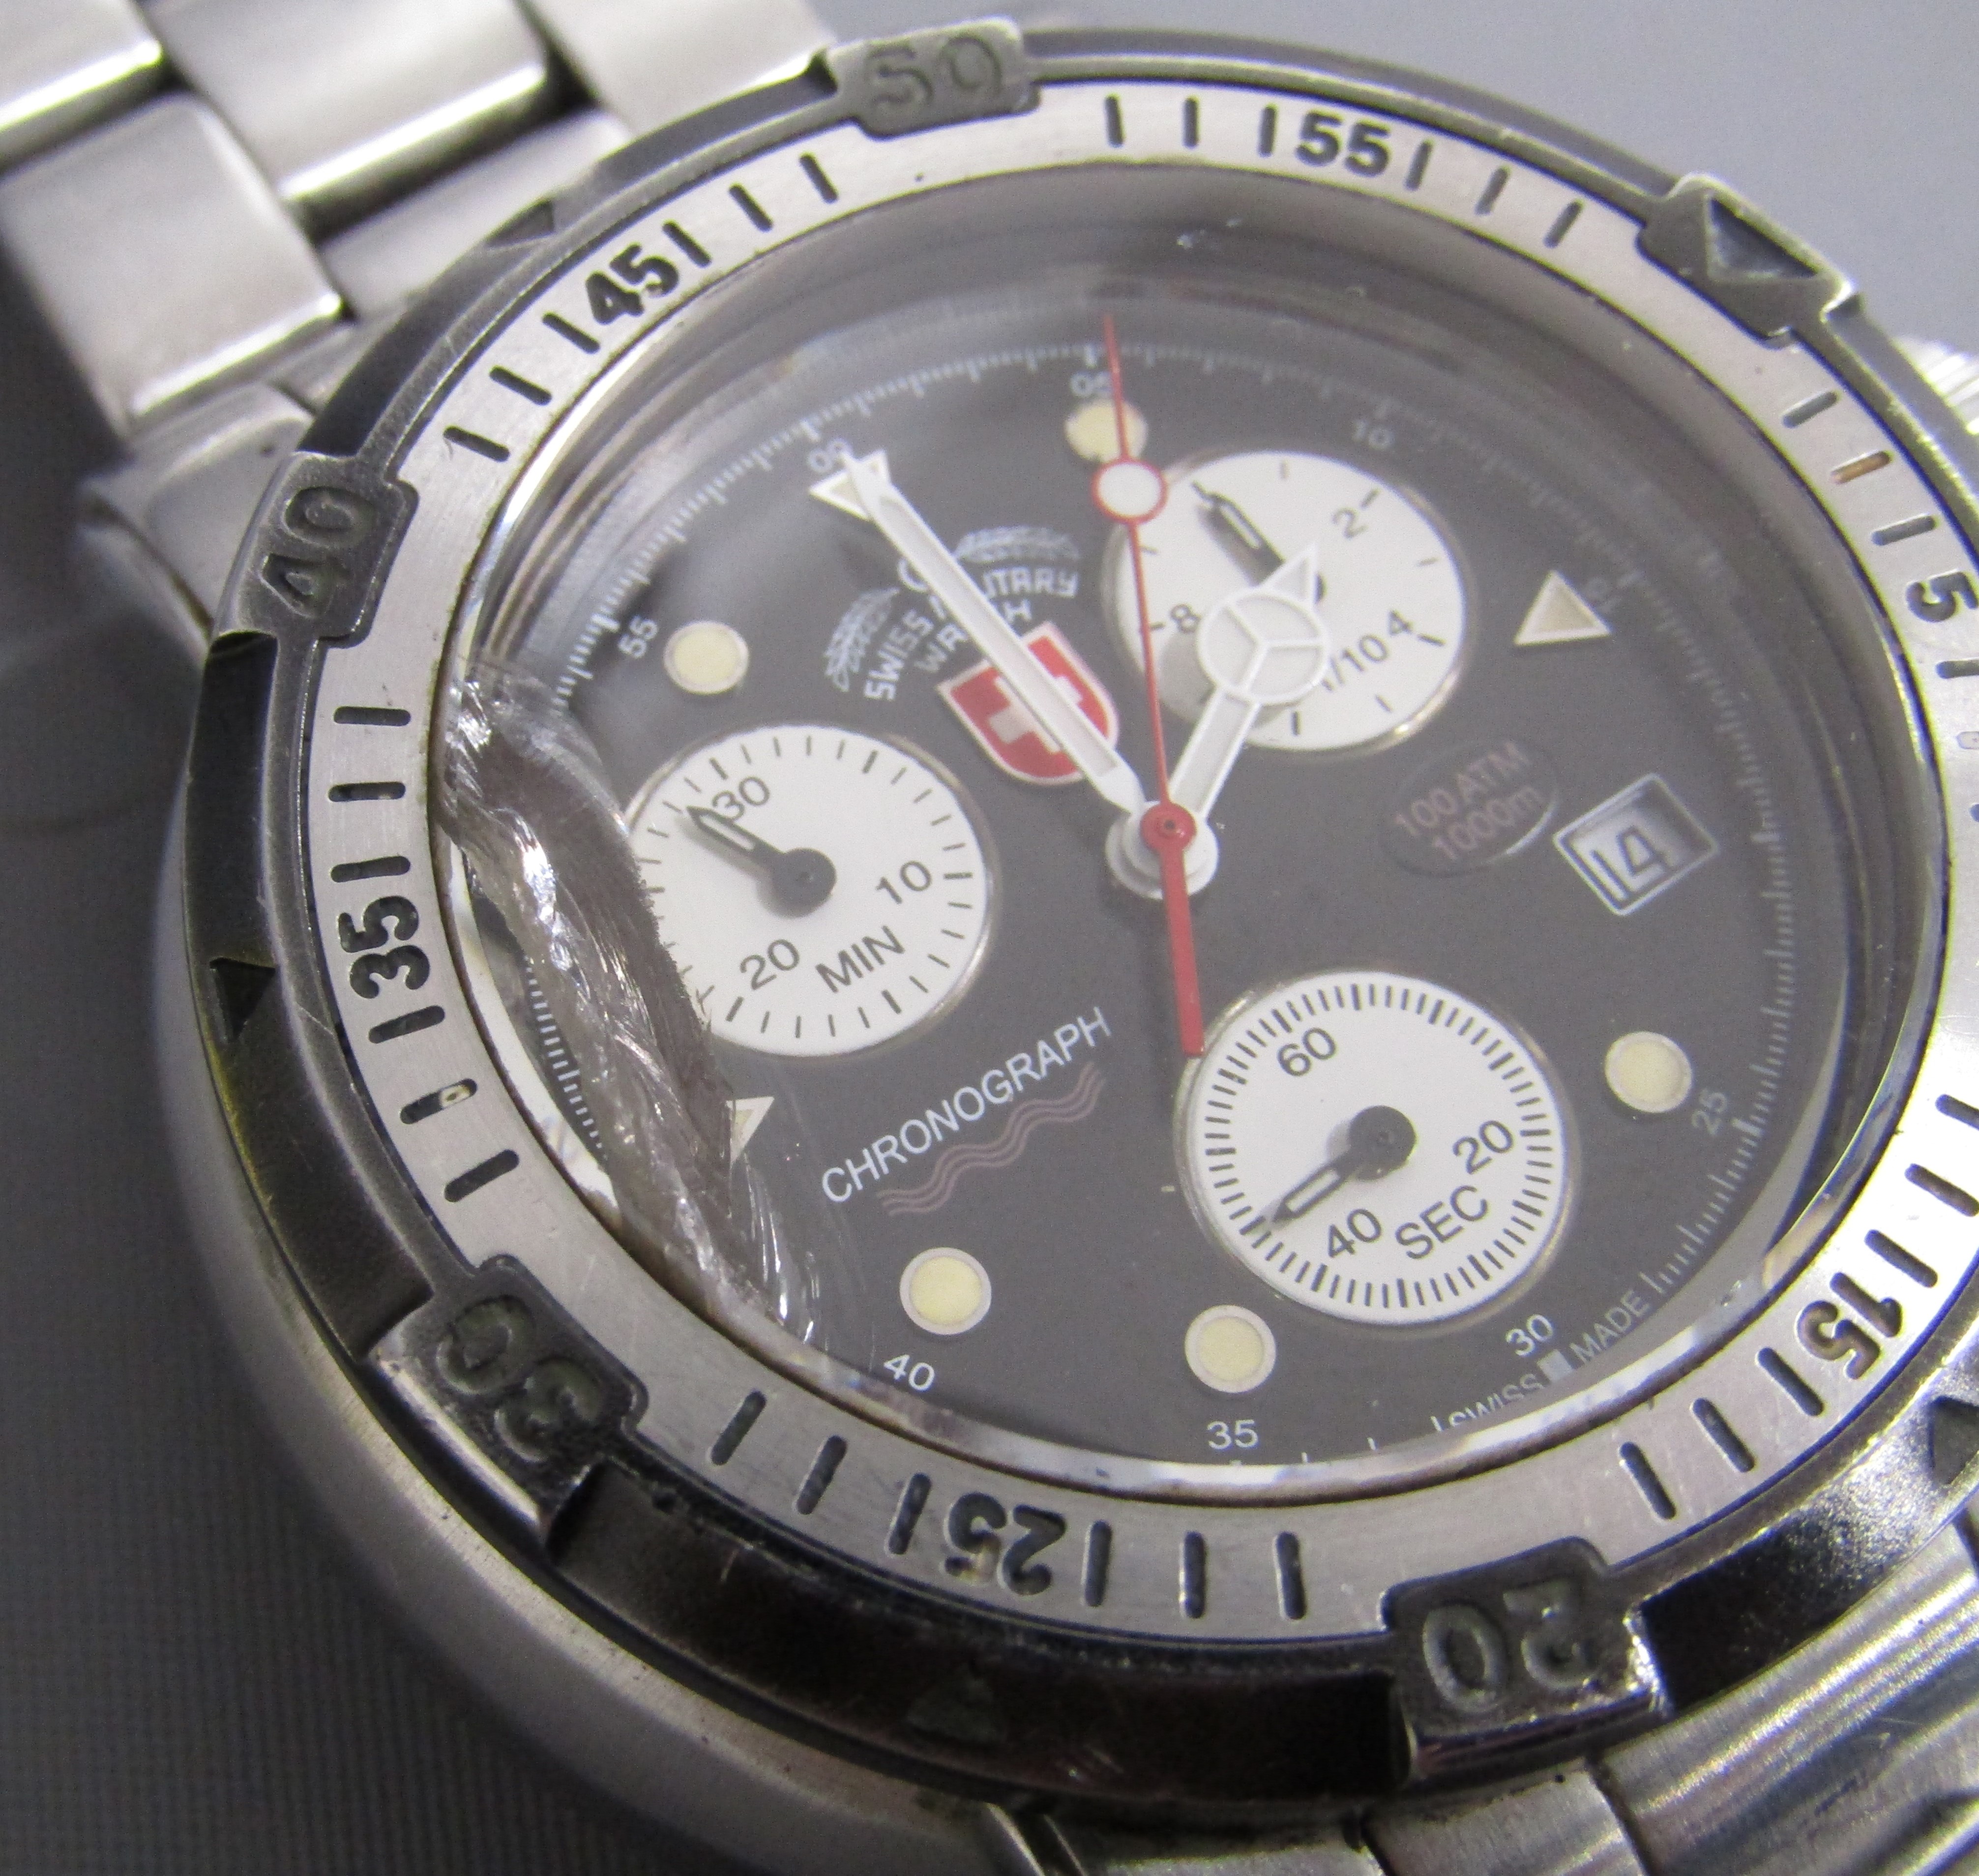 Swiss Military S/2771 limited edition wristwatch - damage to crystal - Image 5 of 8